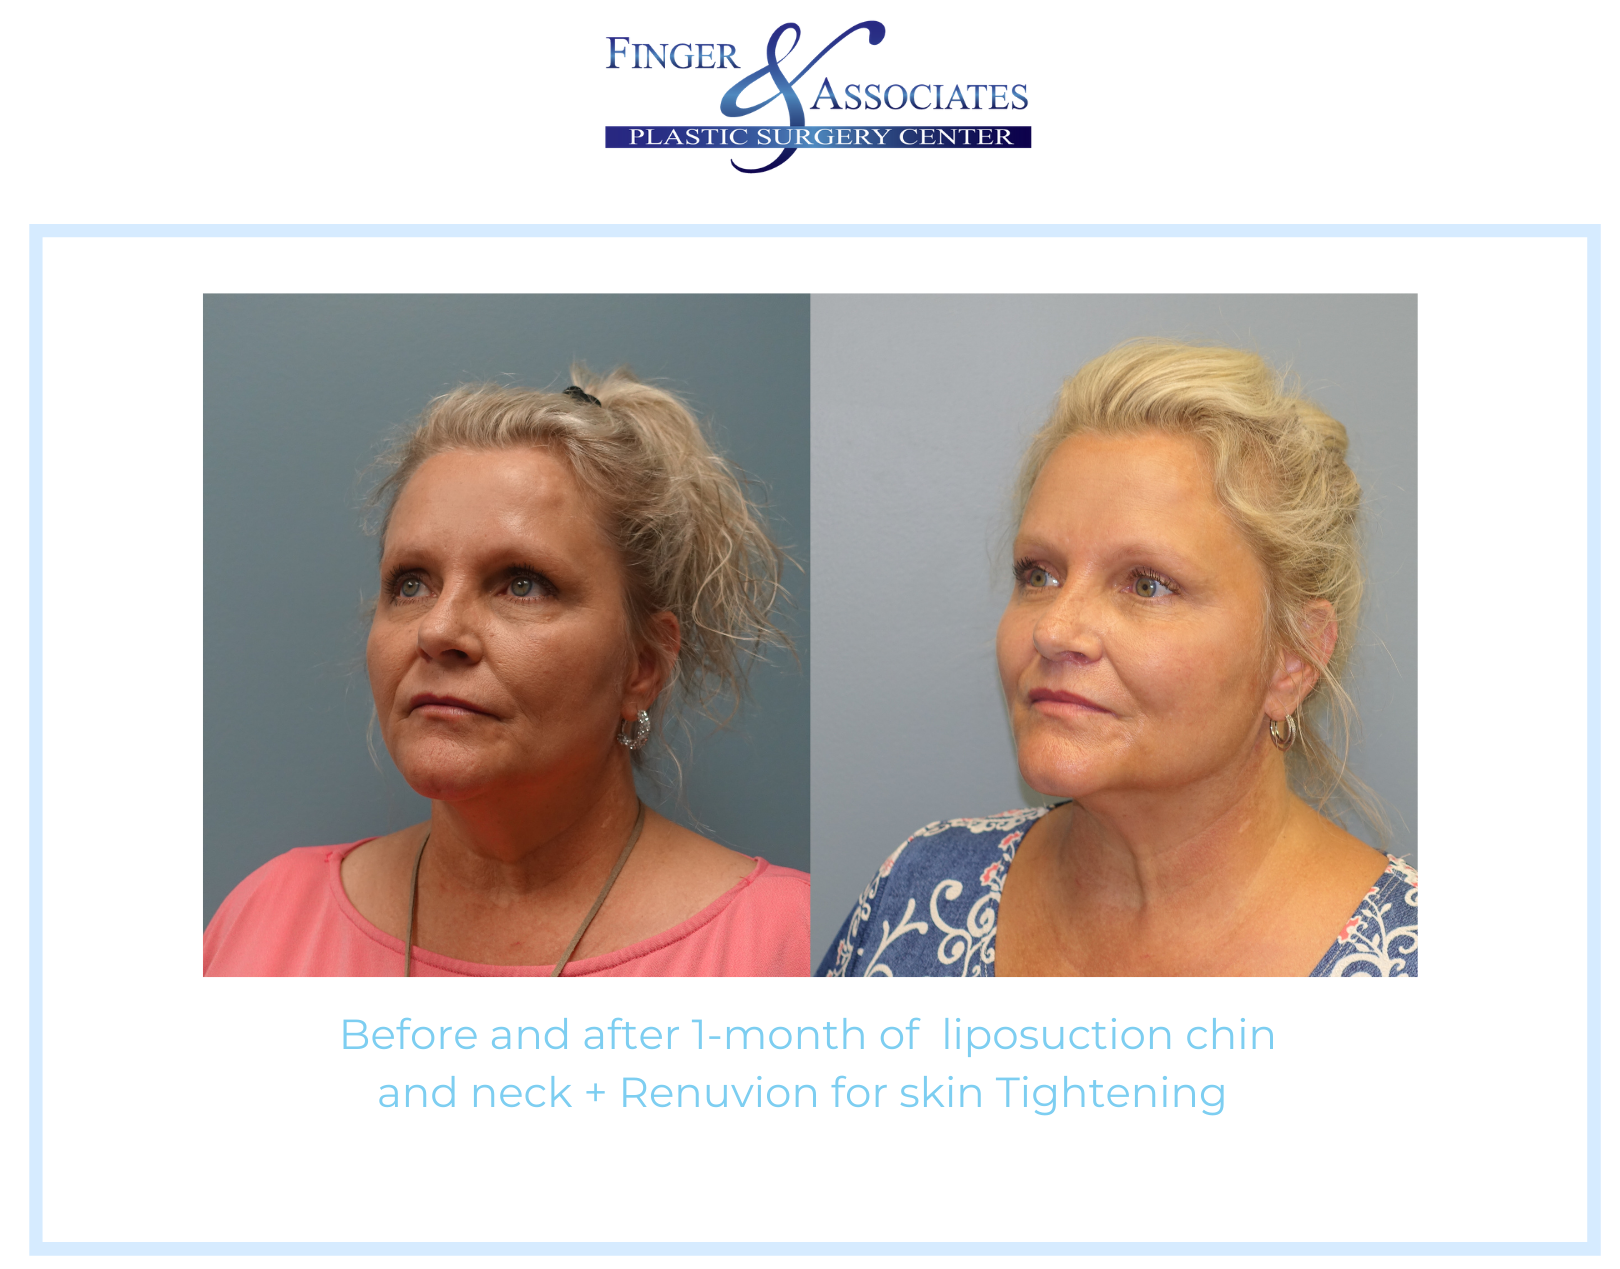 Before and after Renuvion + Lipo by Dr. Finger in Savannah